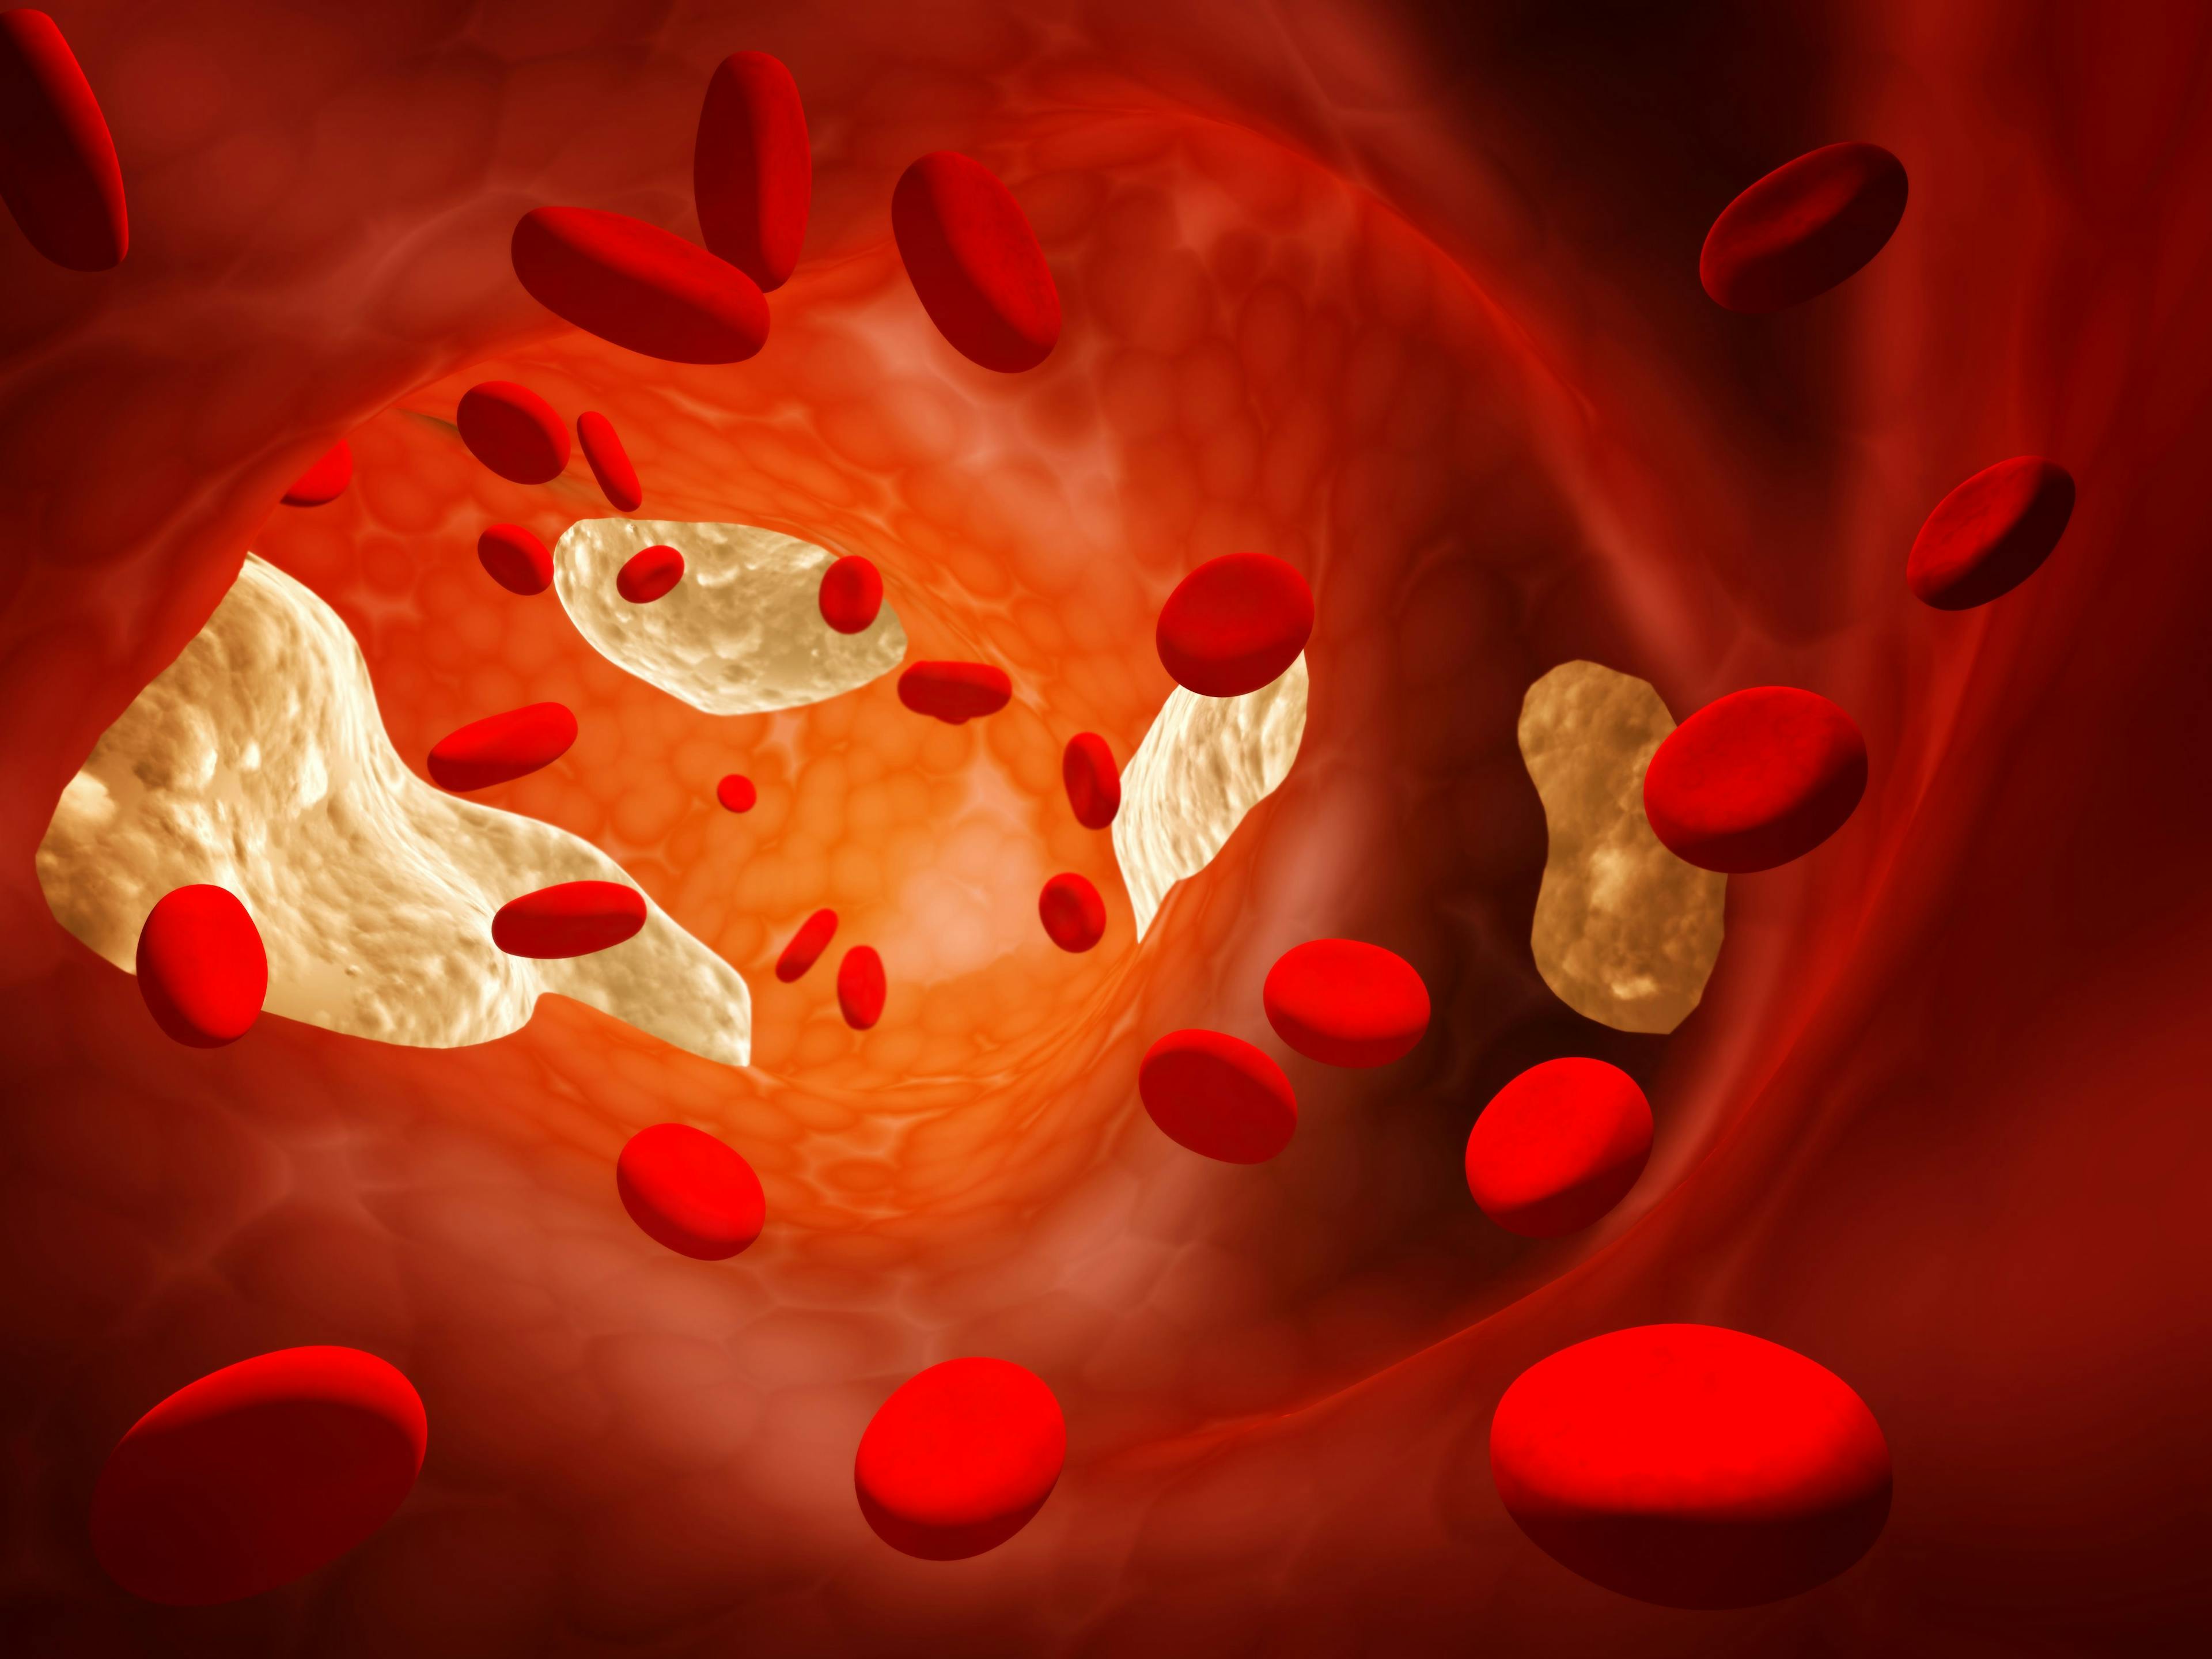 Phase 2 Trial Suggests Evinacumab Cuts LDL-C by 50% in Refractory Hypercholesterolemia 